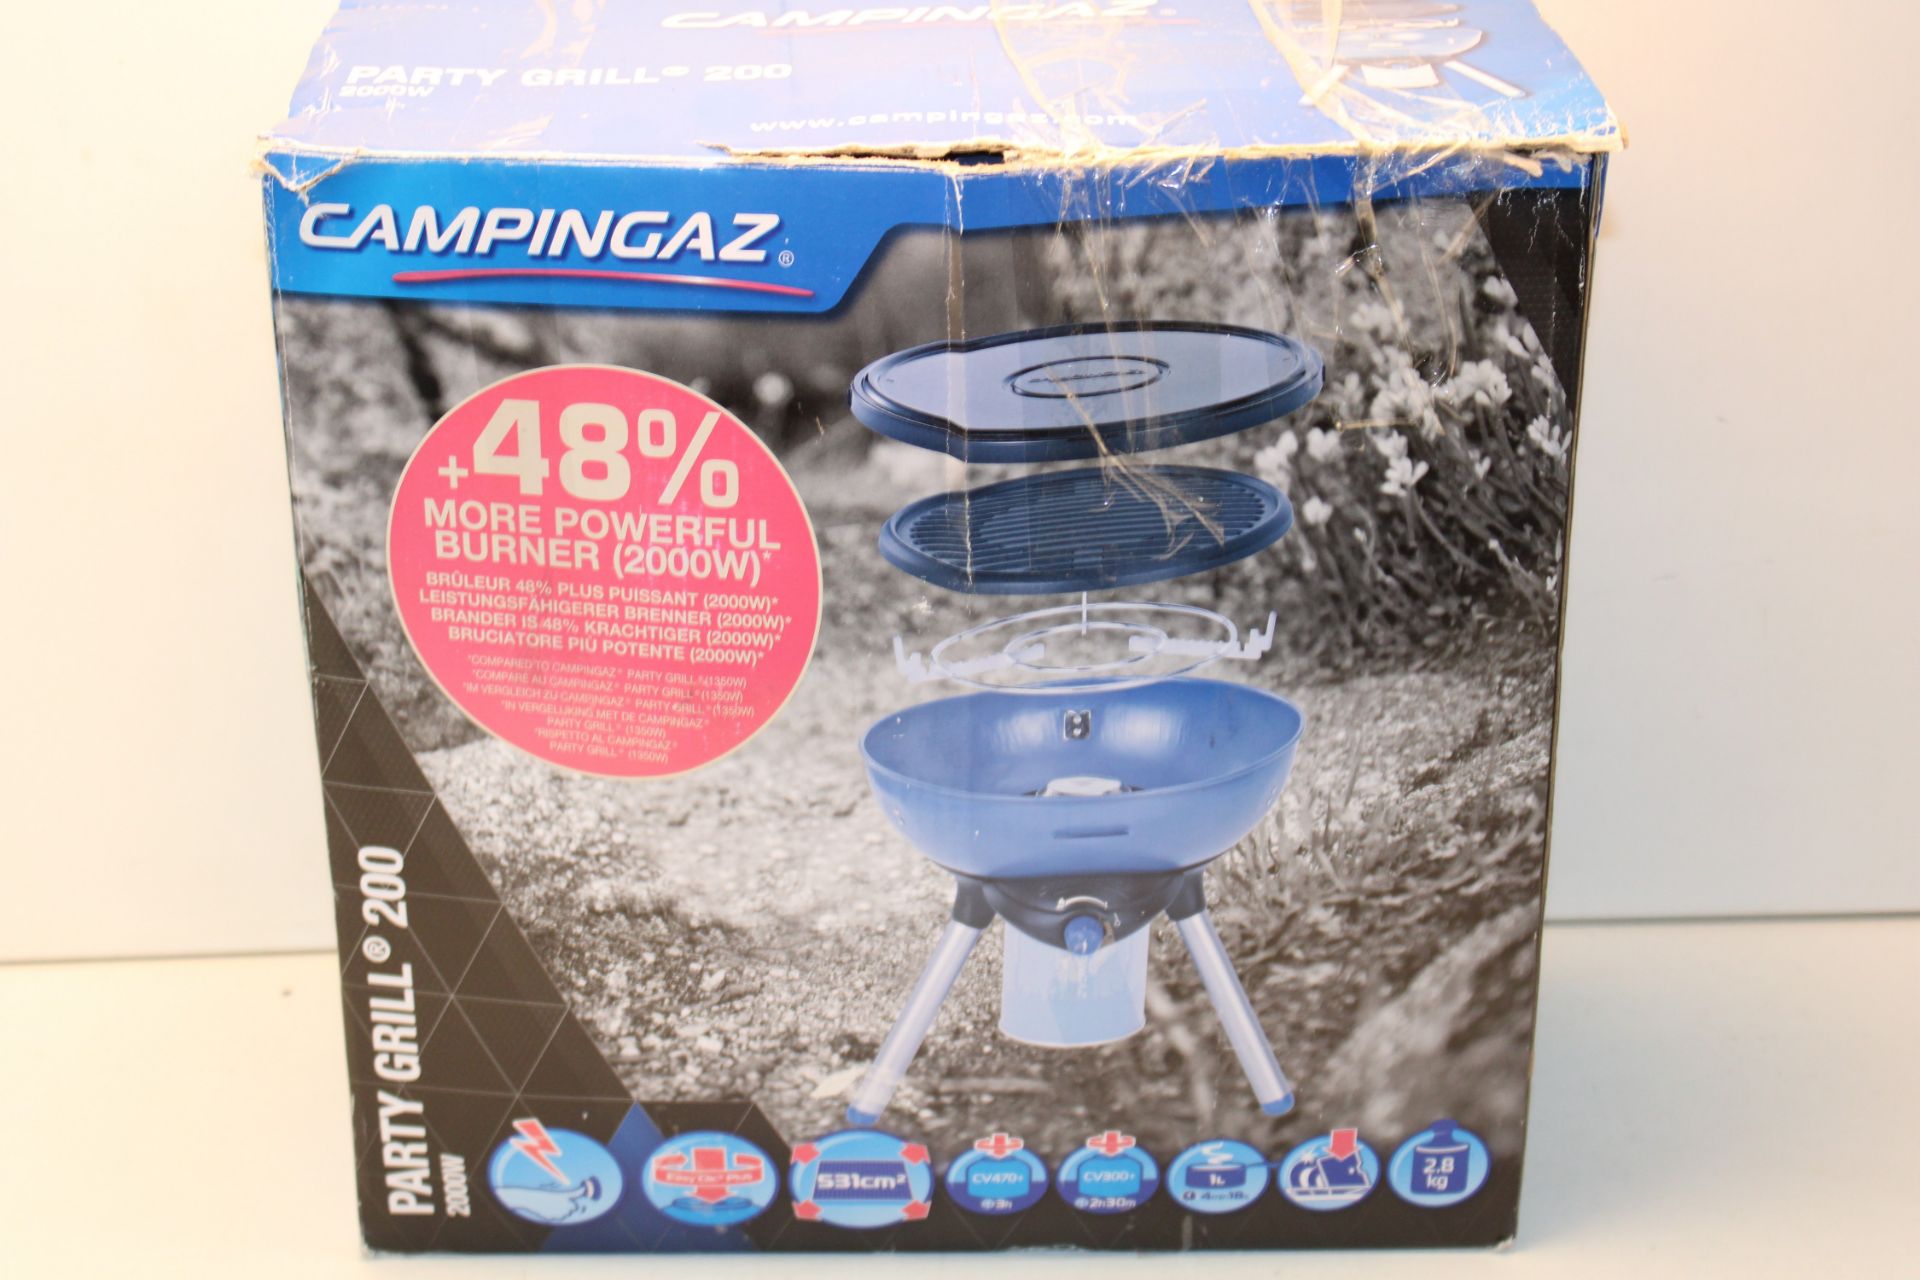 BOXED CAMPINGAZ PARTY GRILL 200 2000W RRP £61.50Condition ReportAppraisal Available on Request-